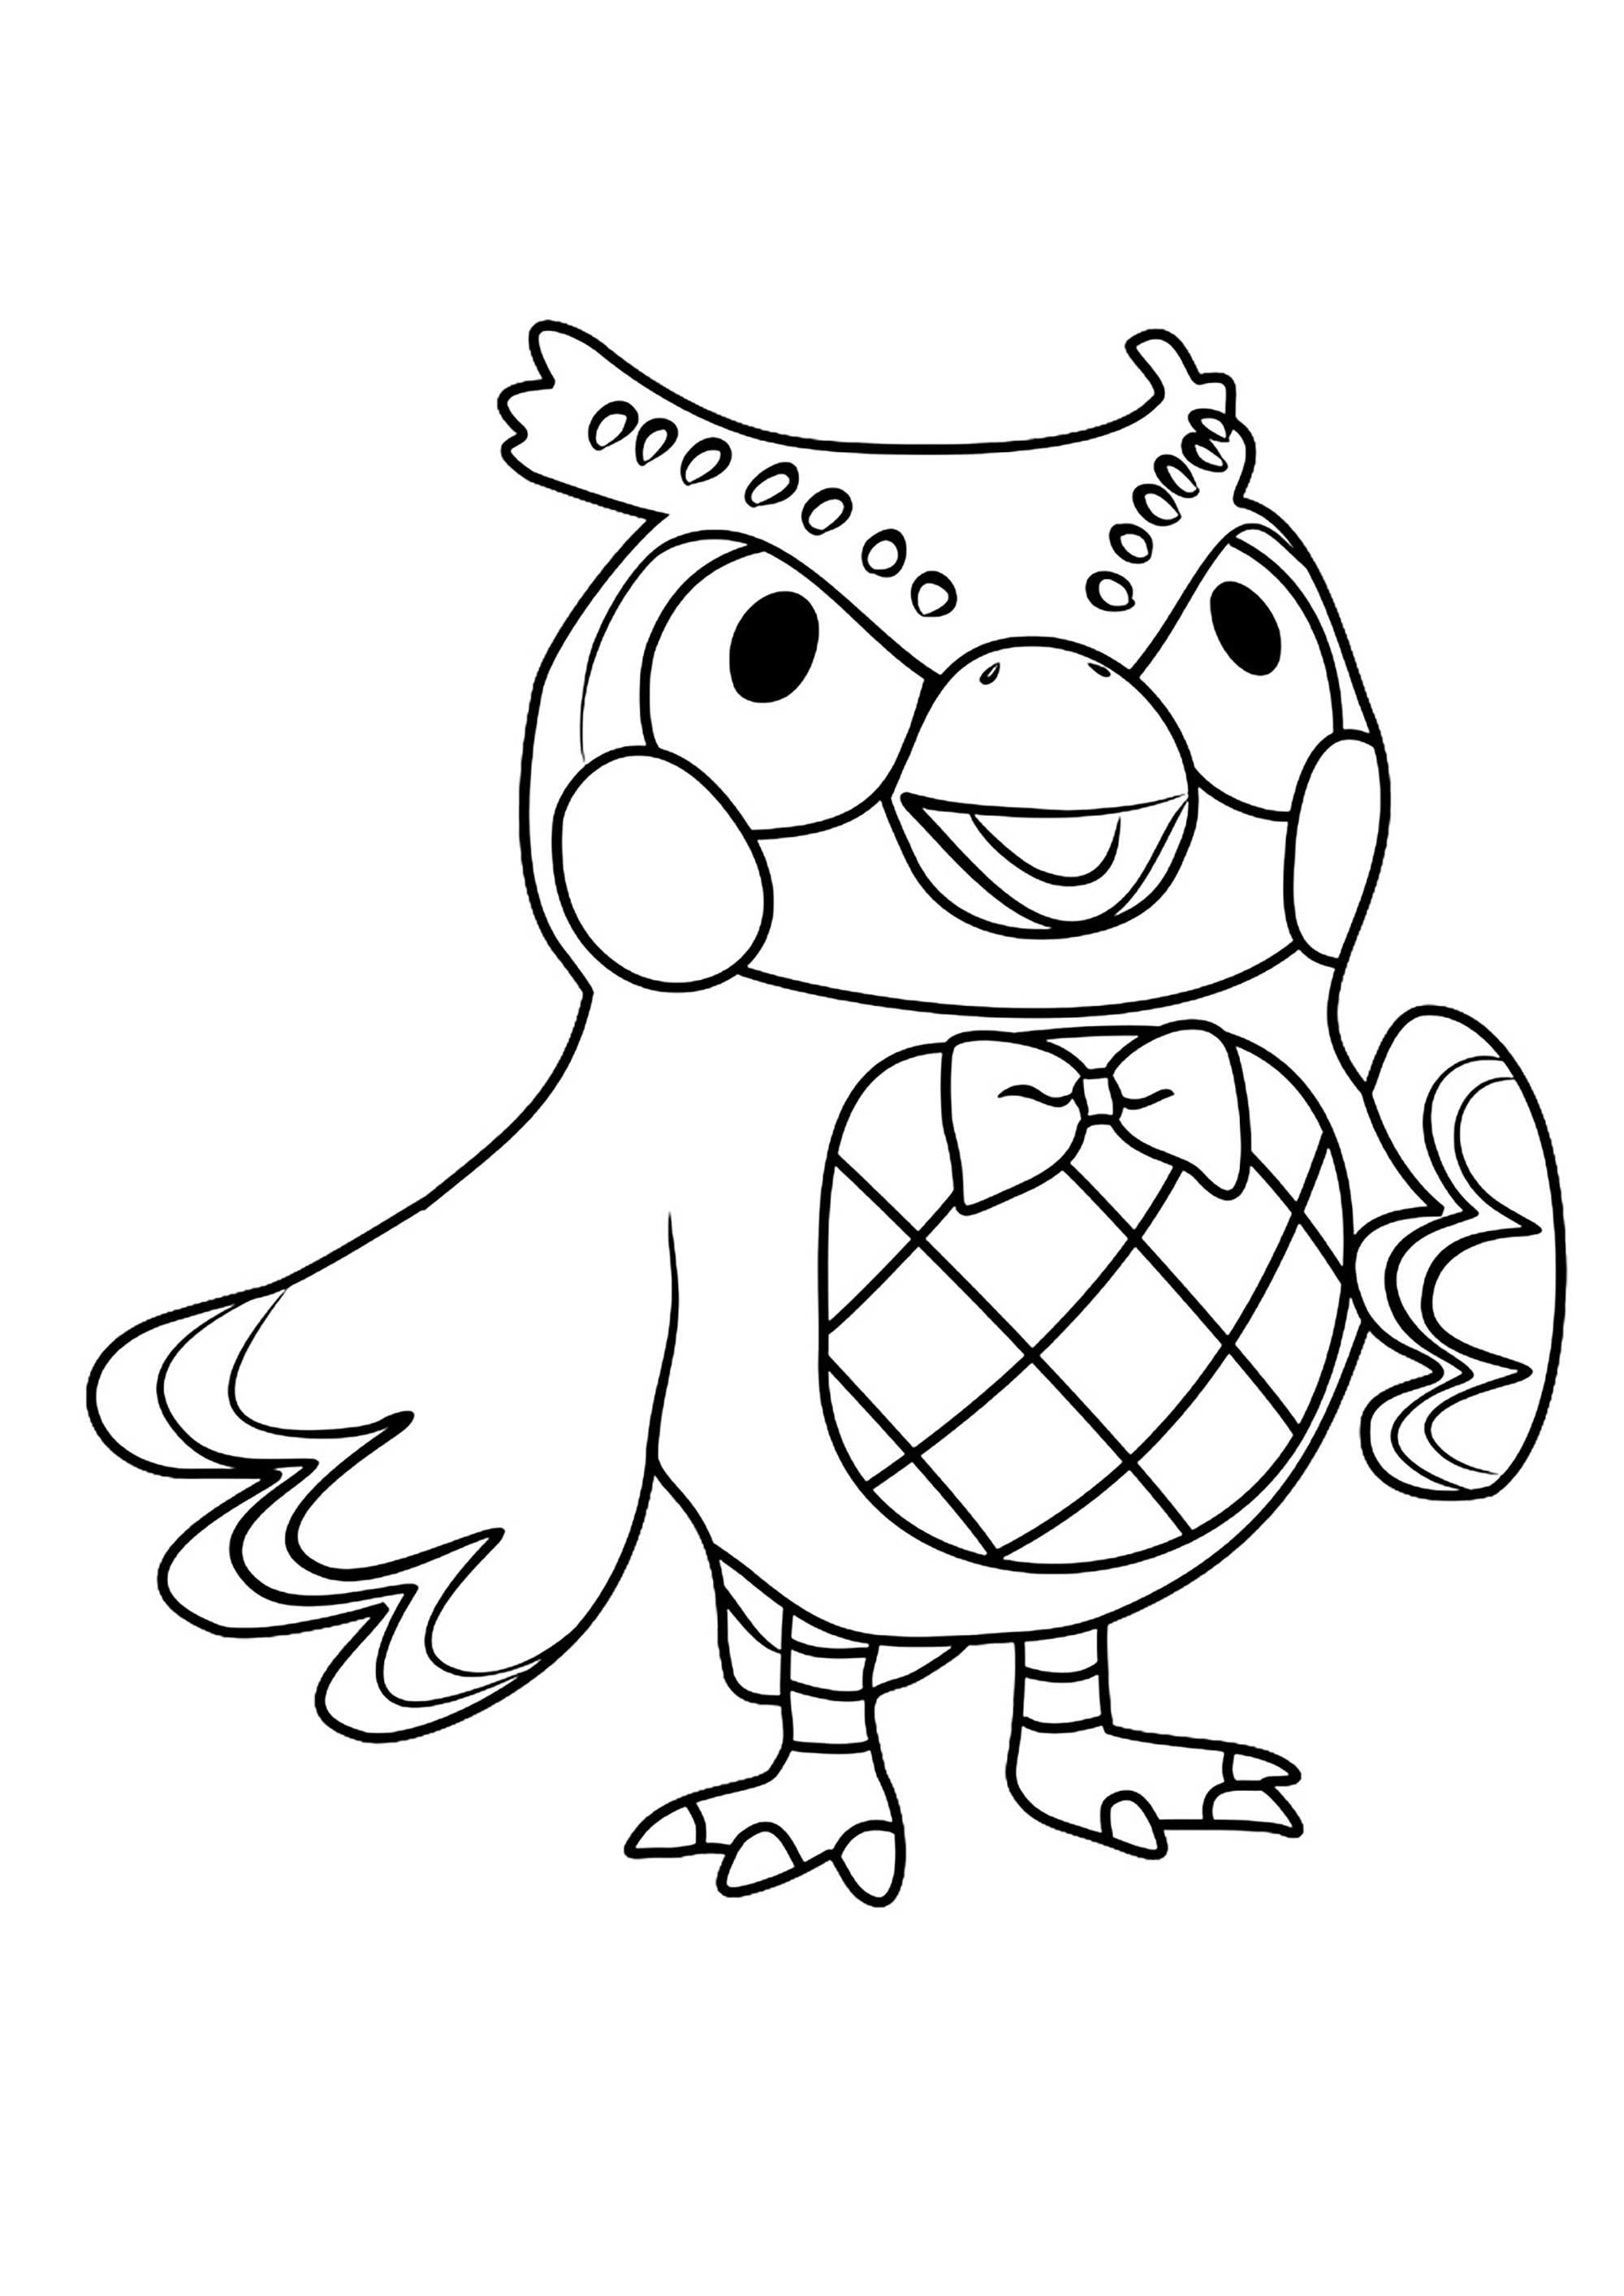 Blathers the owl